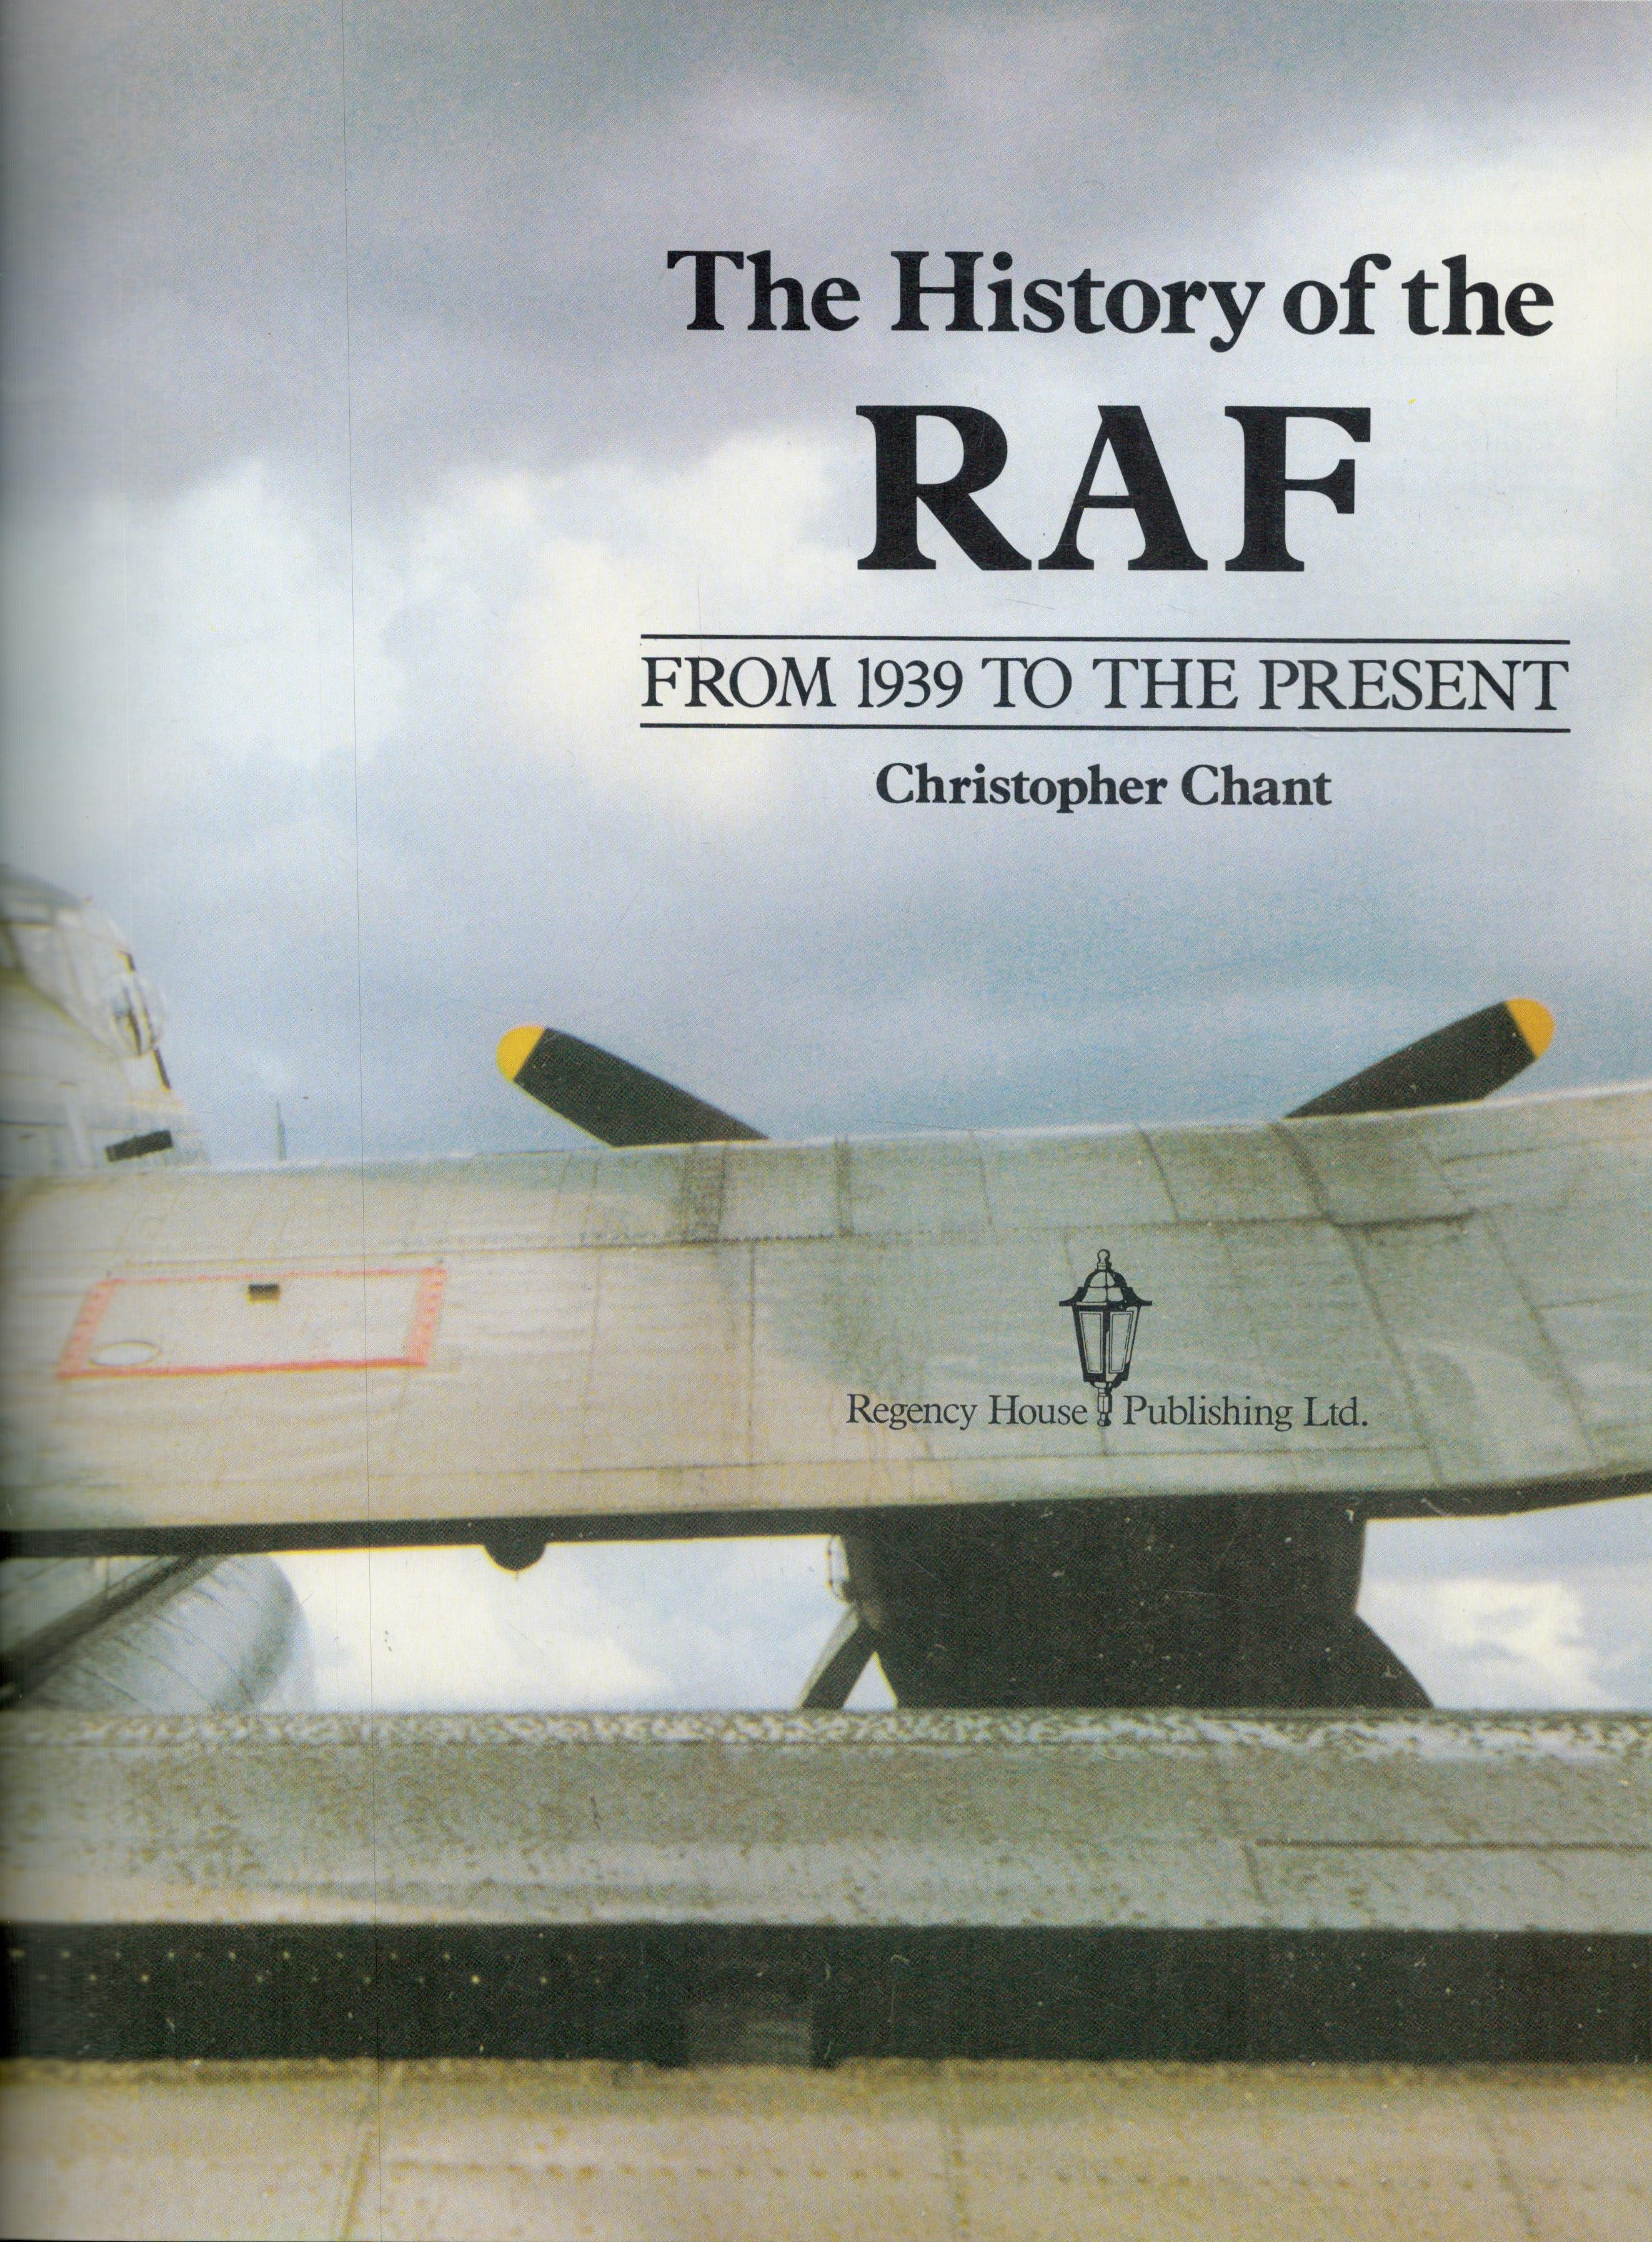 The History of The RAF by Christopher Chant Hardback Book 1994 Special Revised Edition published - Image 2 of 3